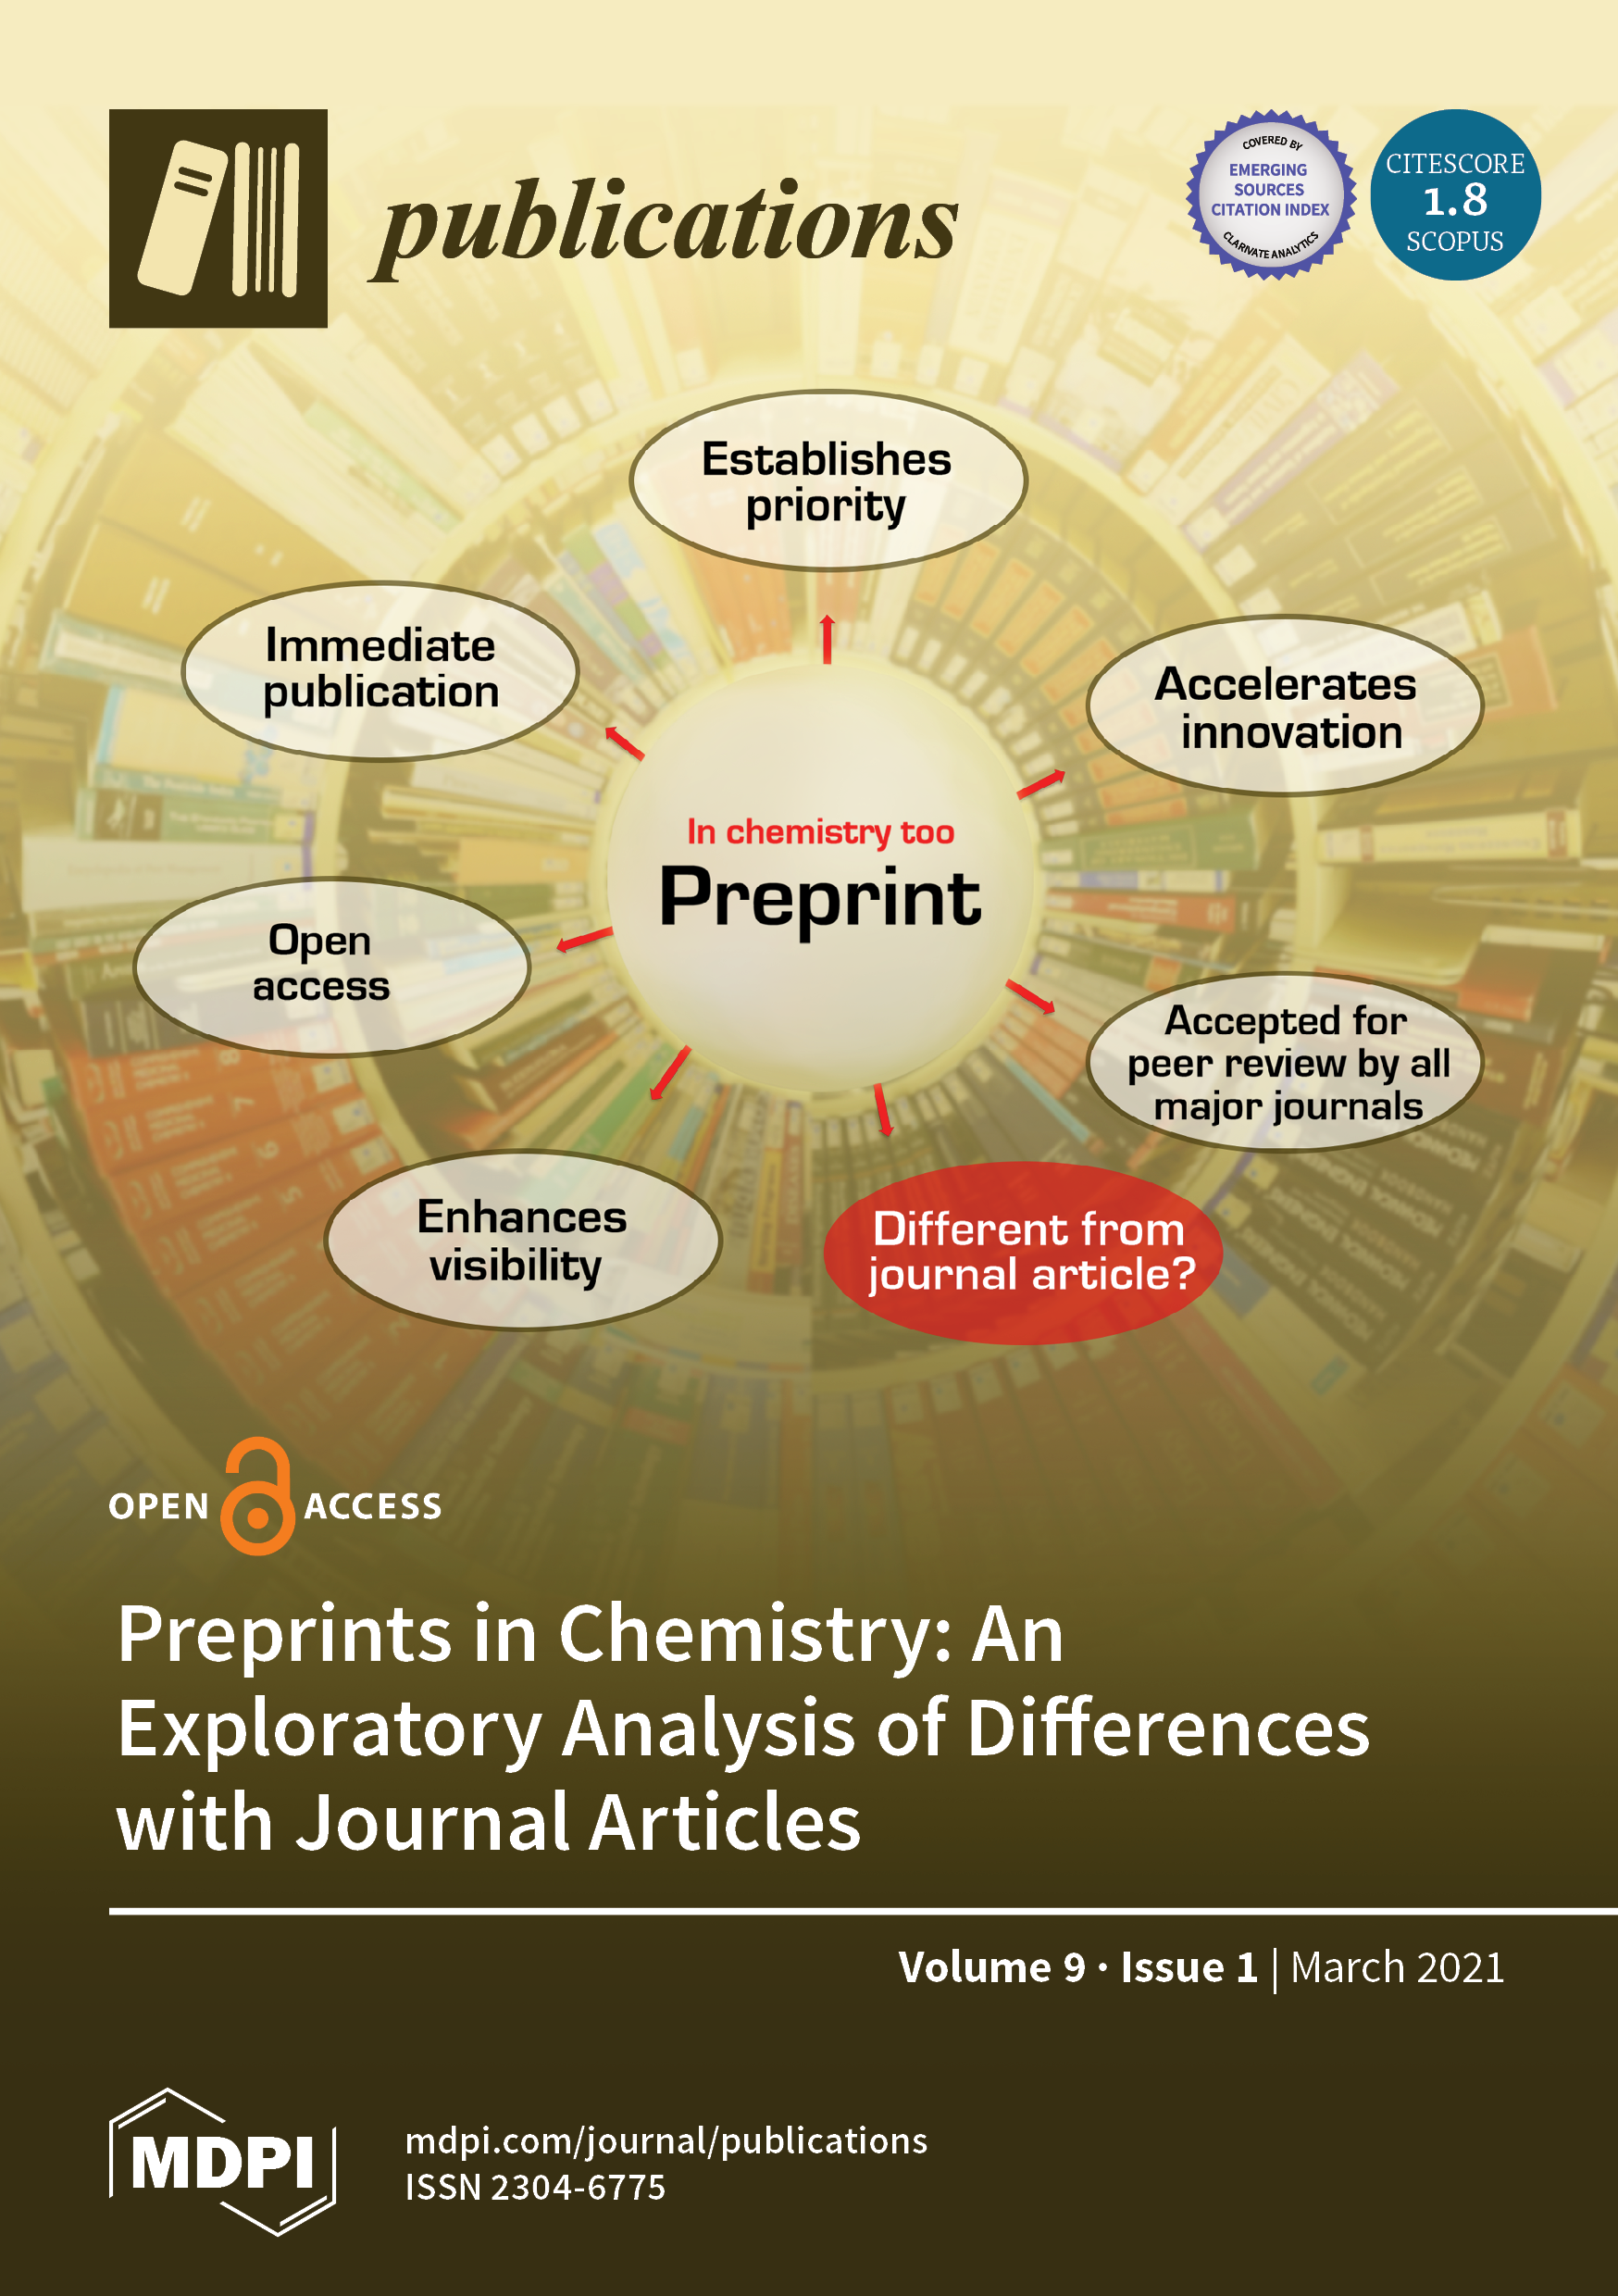 Publications cover dedicated to Mario Pagliaro's work on preprints in chemistry